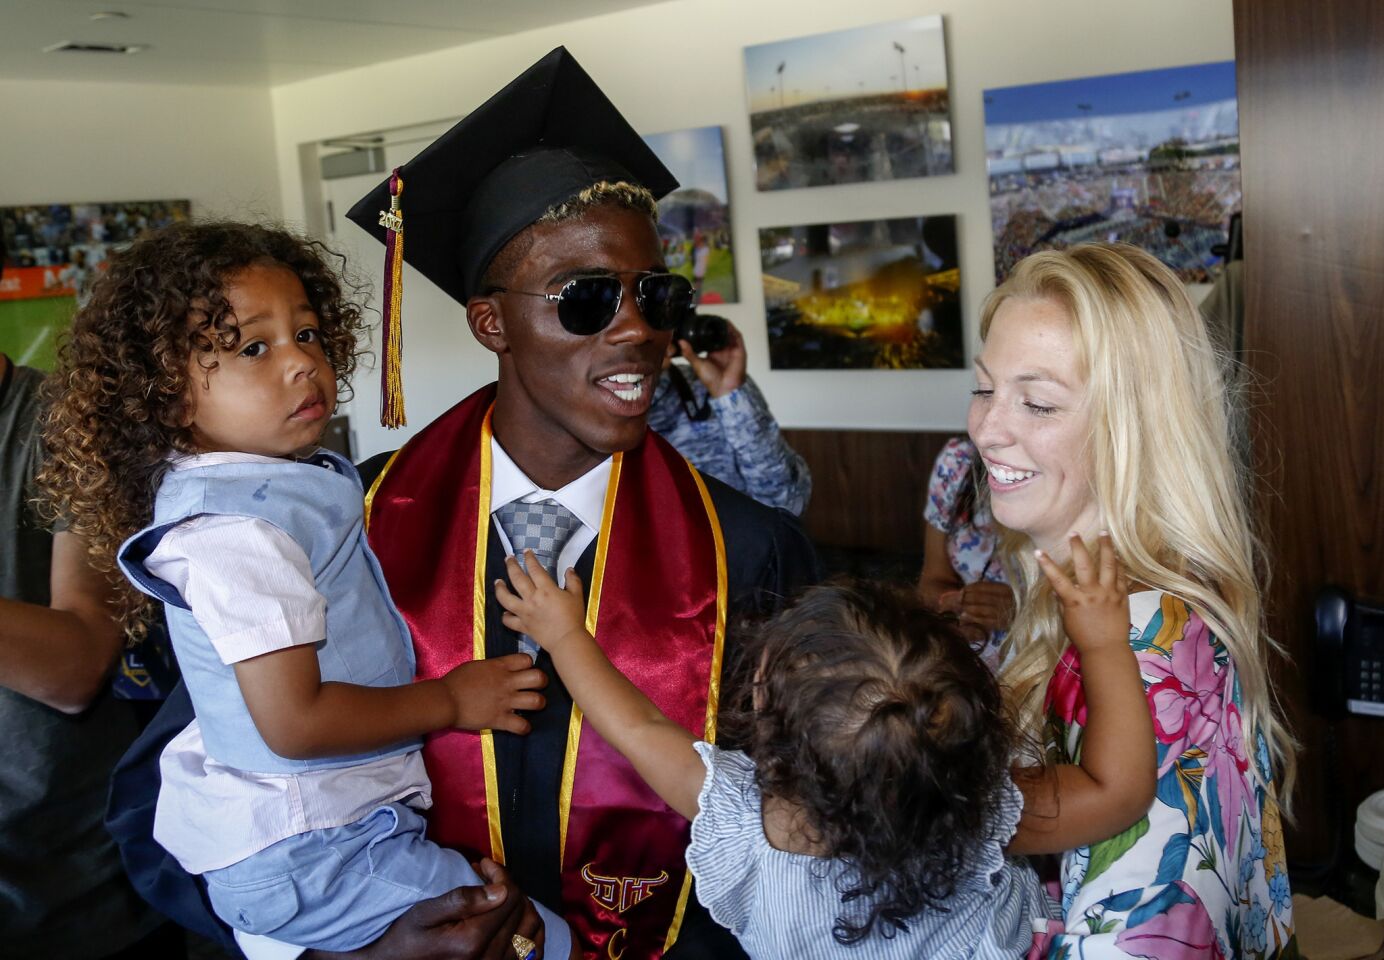 Galaxy soccer star Gyasi Zardes celebrates with his wife, Madie, and children, Gyan and Maylie, after graduating from Cal State Dominguez Hills.